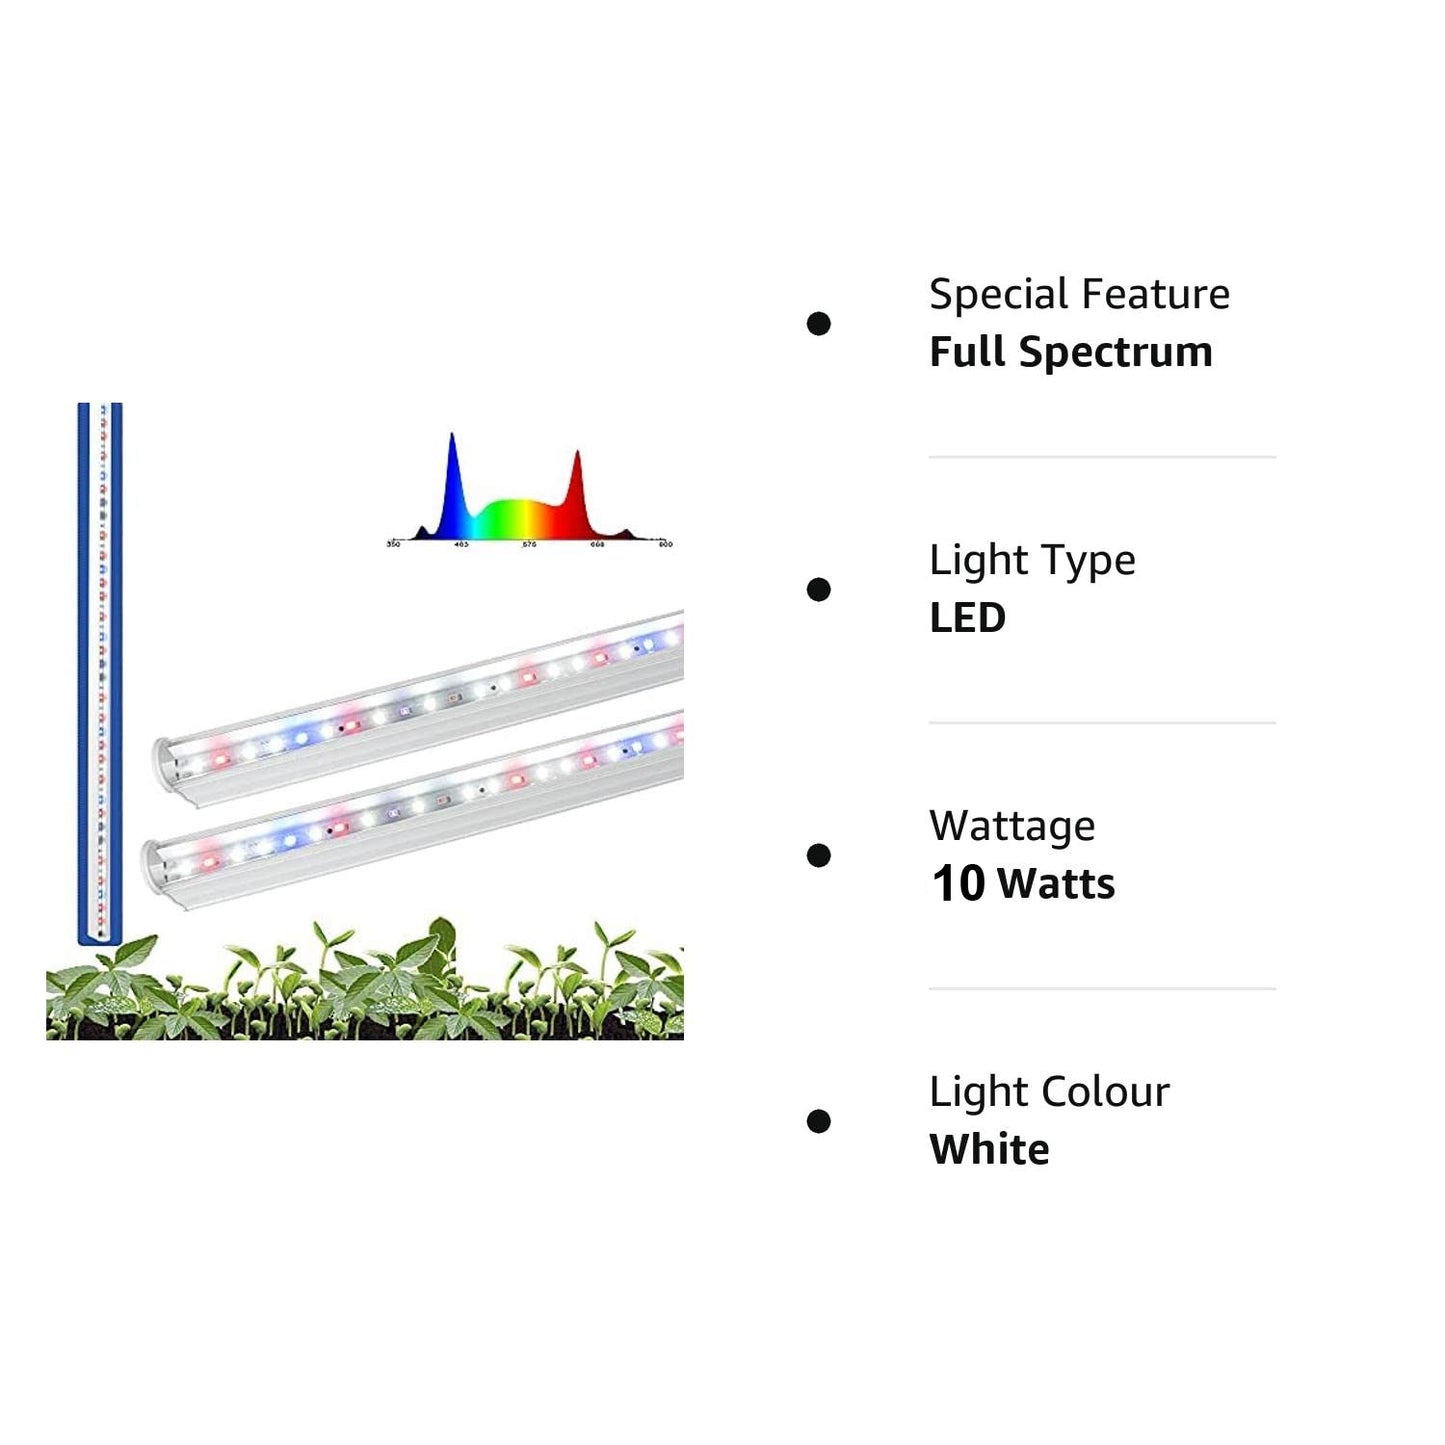 Casa De Amor Grow Lights 10W Leafy Greens Full Spectrum High Efficiency LED Grow Tube in India for Indoor Plants Gardening Hydroponics Greenhouse Farming(Pack of 4)